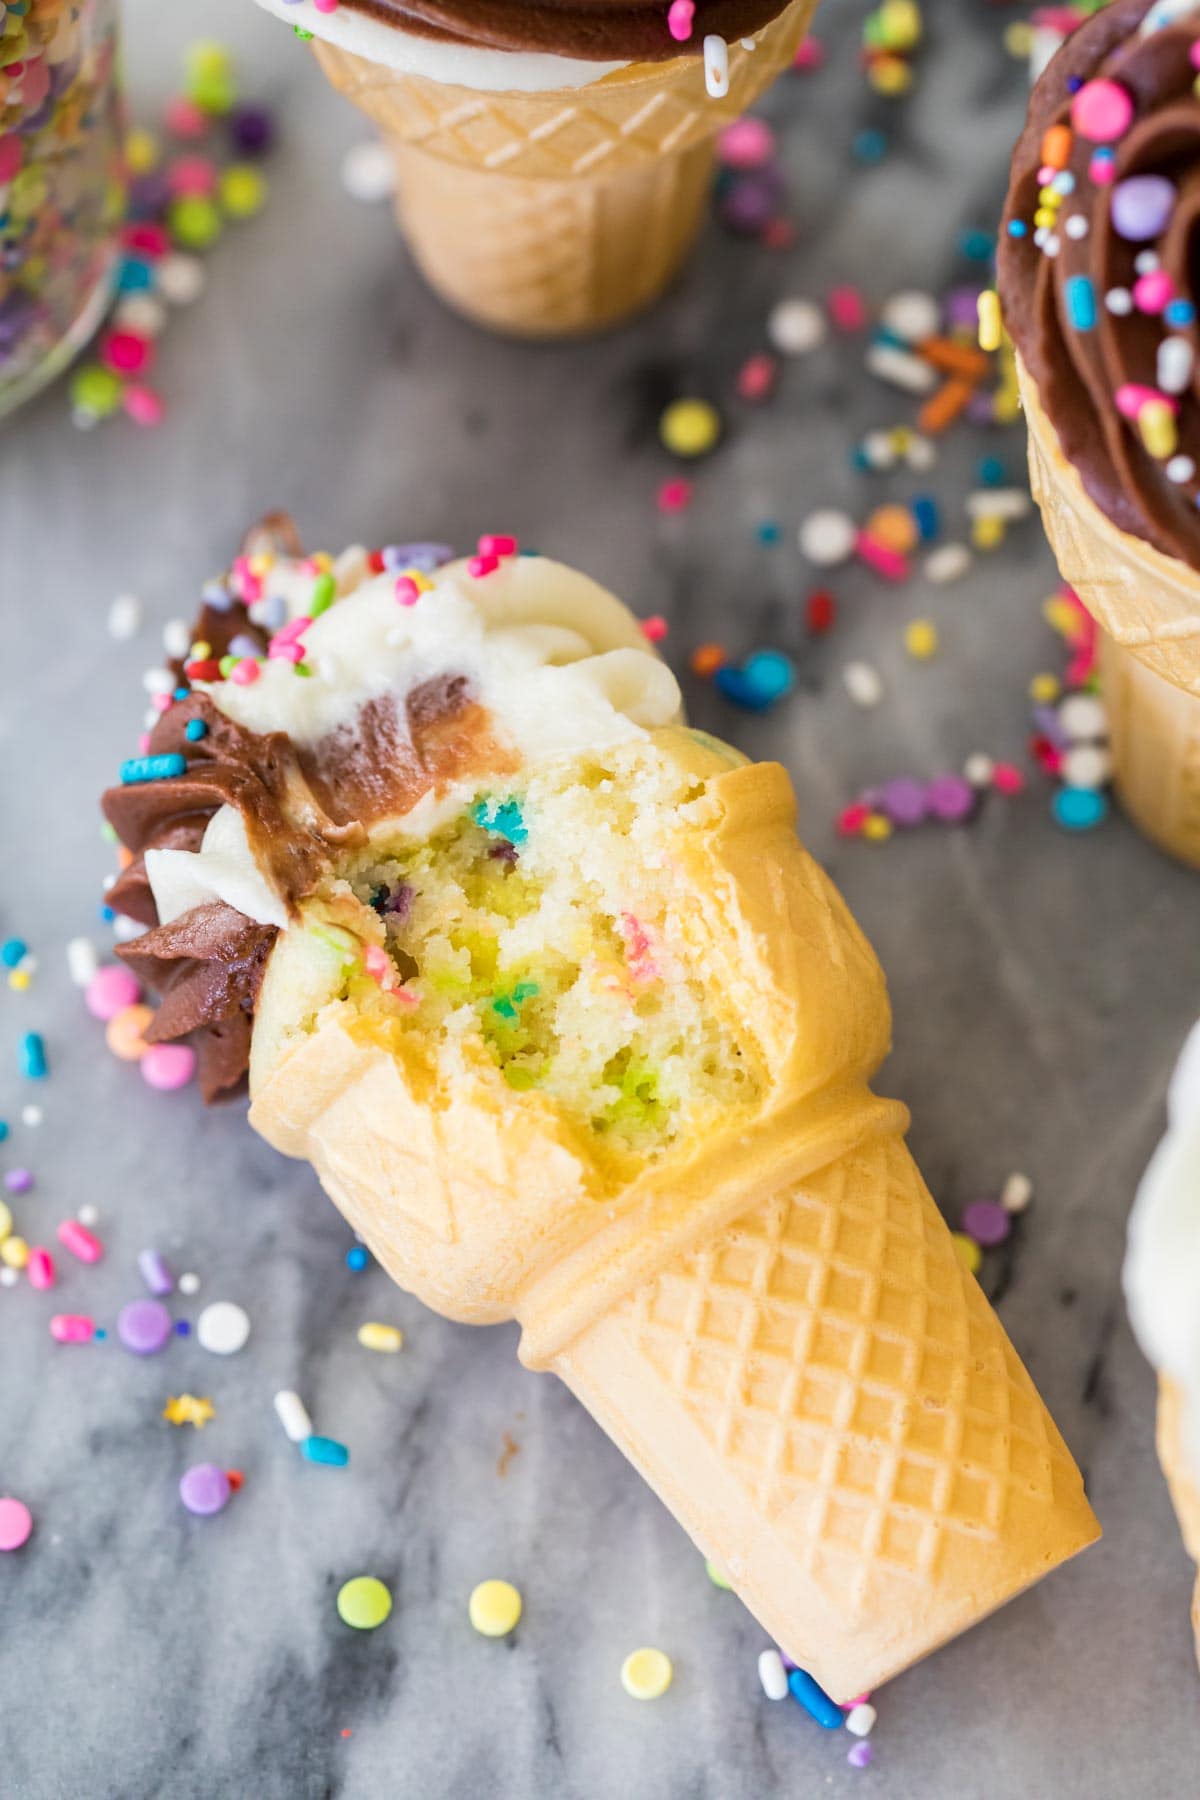 Ice cream cone bitten to show sprinkle filled cake batter inside.